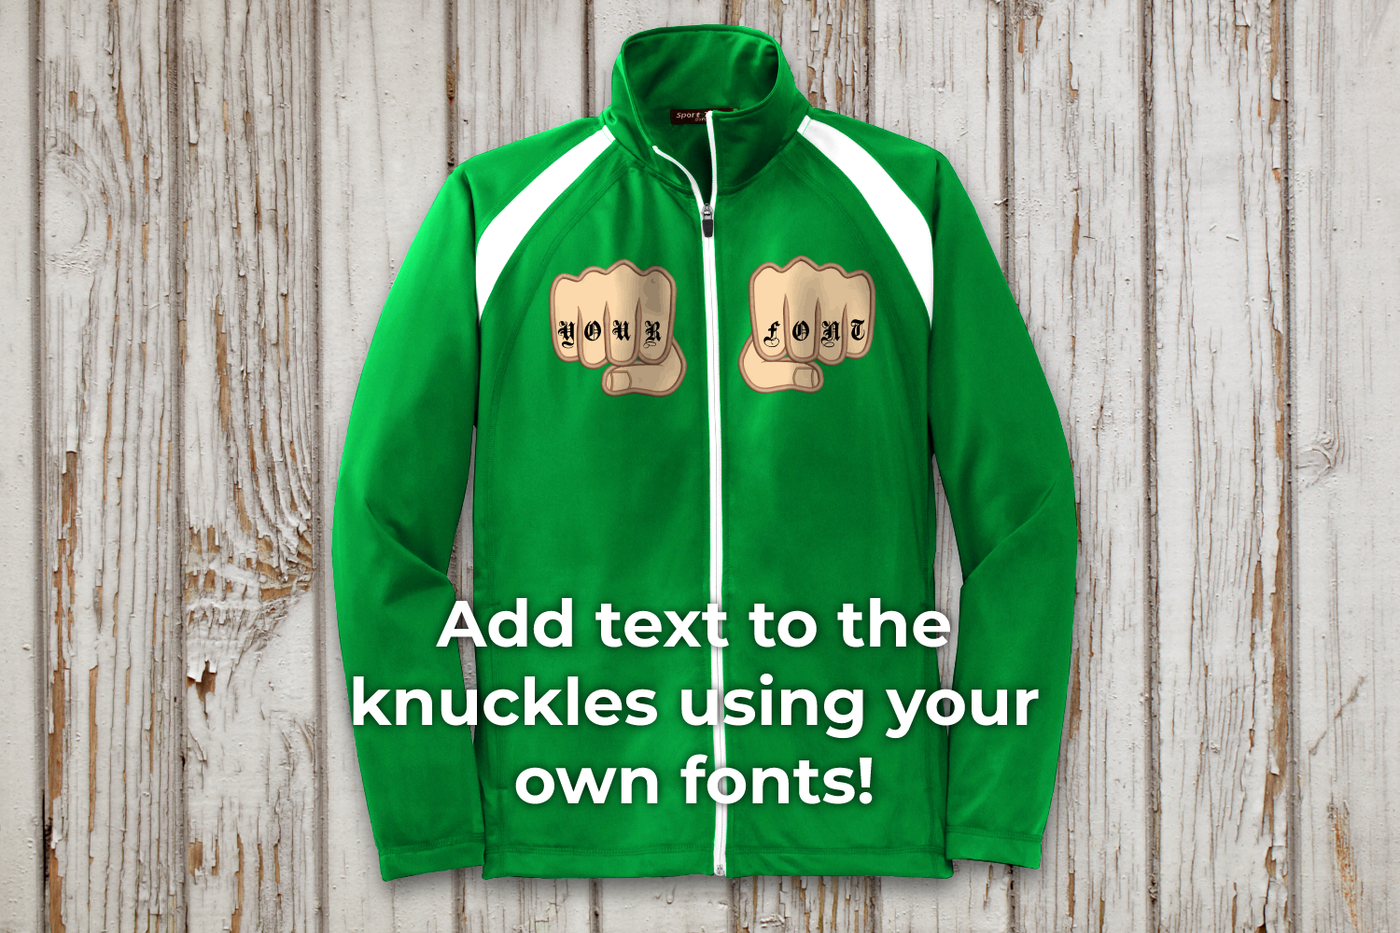 A green track jacket with two applique fists. Added to the knuckles it says "YOUR FONT." On top of the image it says "Add text to the knuckles using your own fonts!"